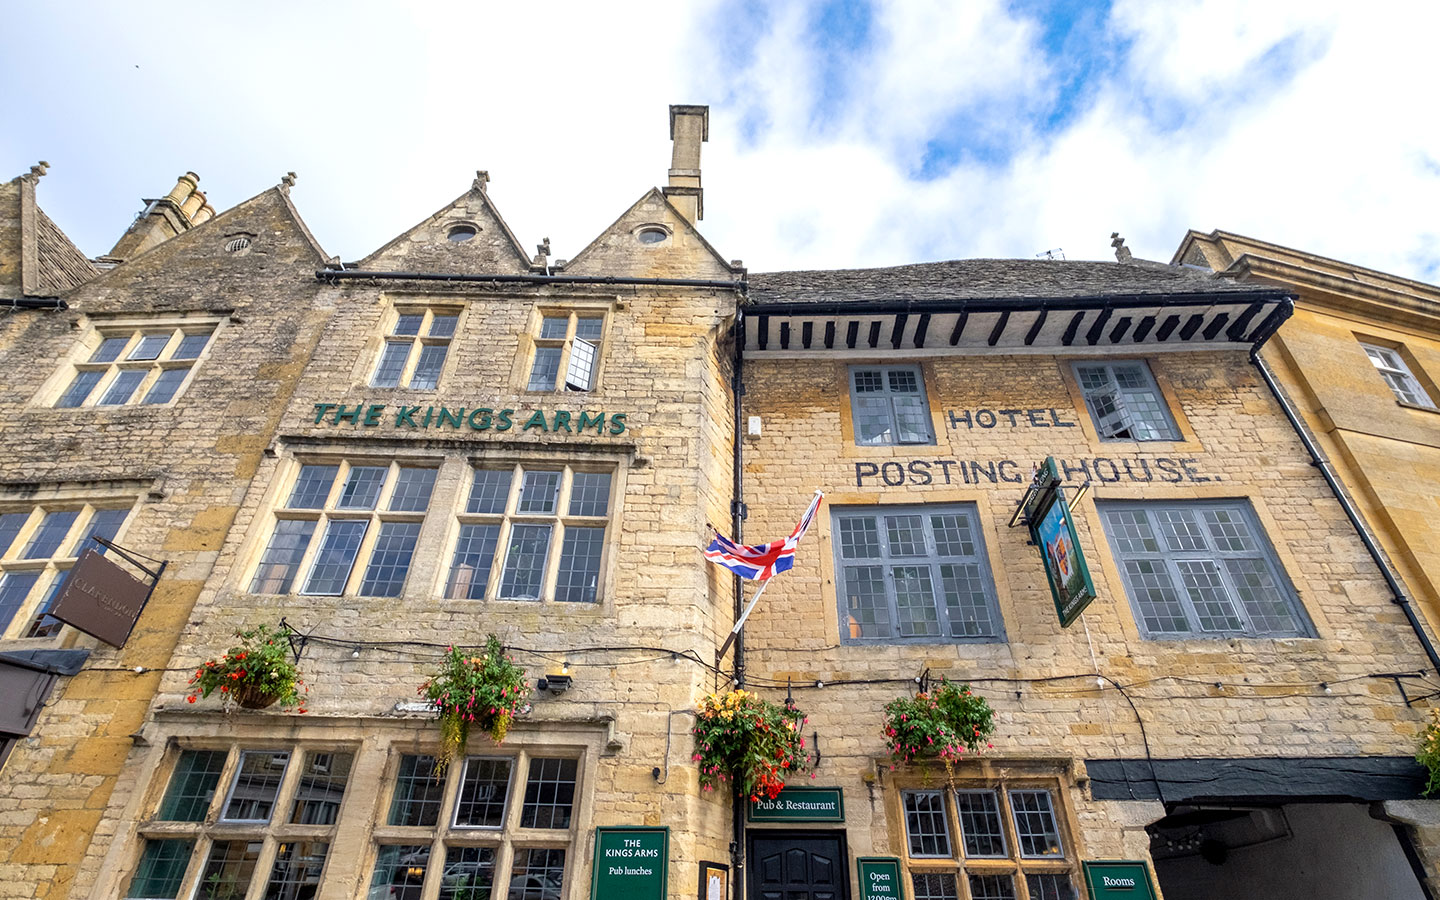 Things to do in Stow-on-the-Wold: A local’s guide